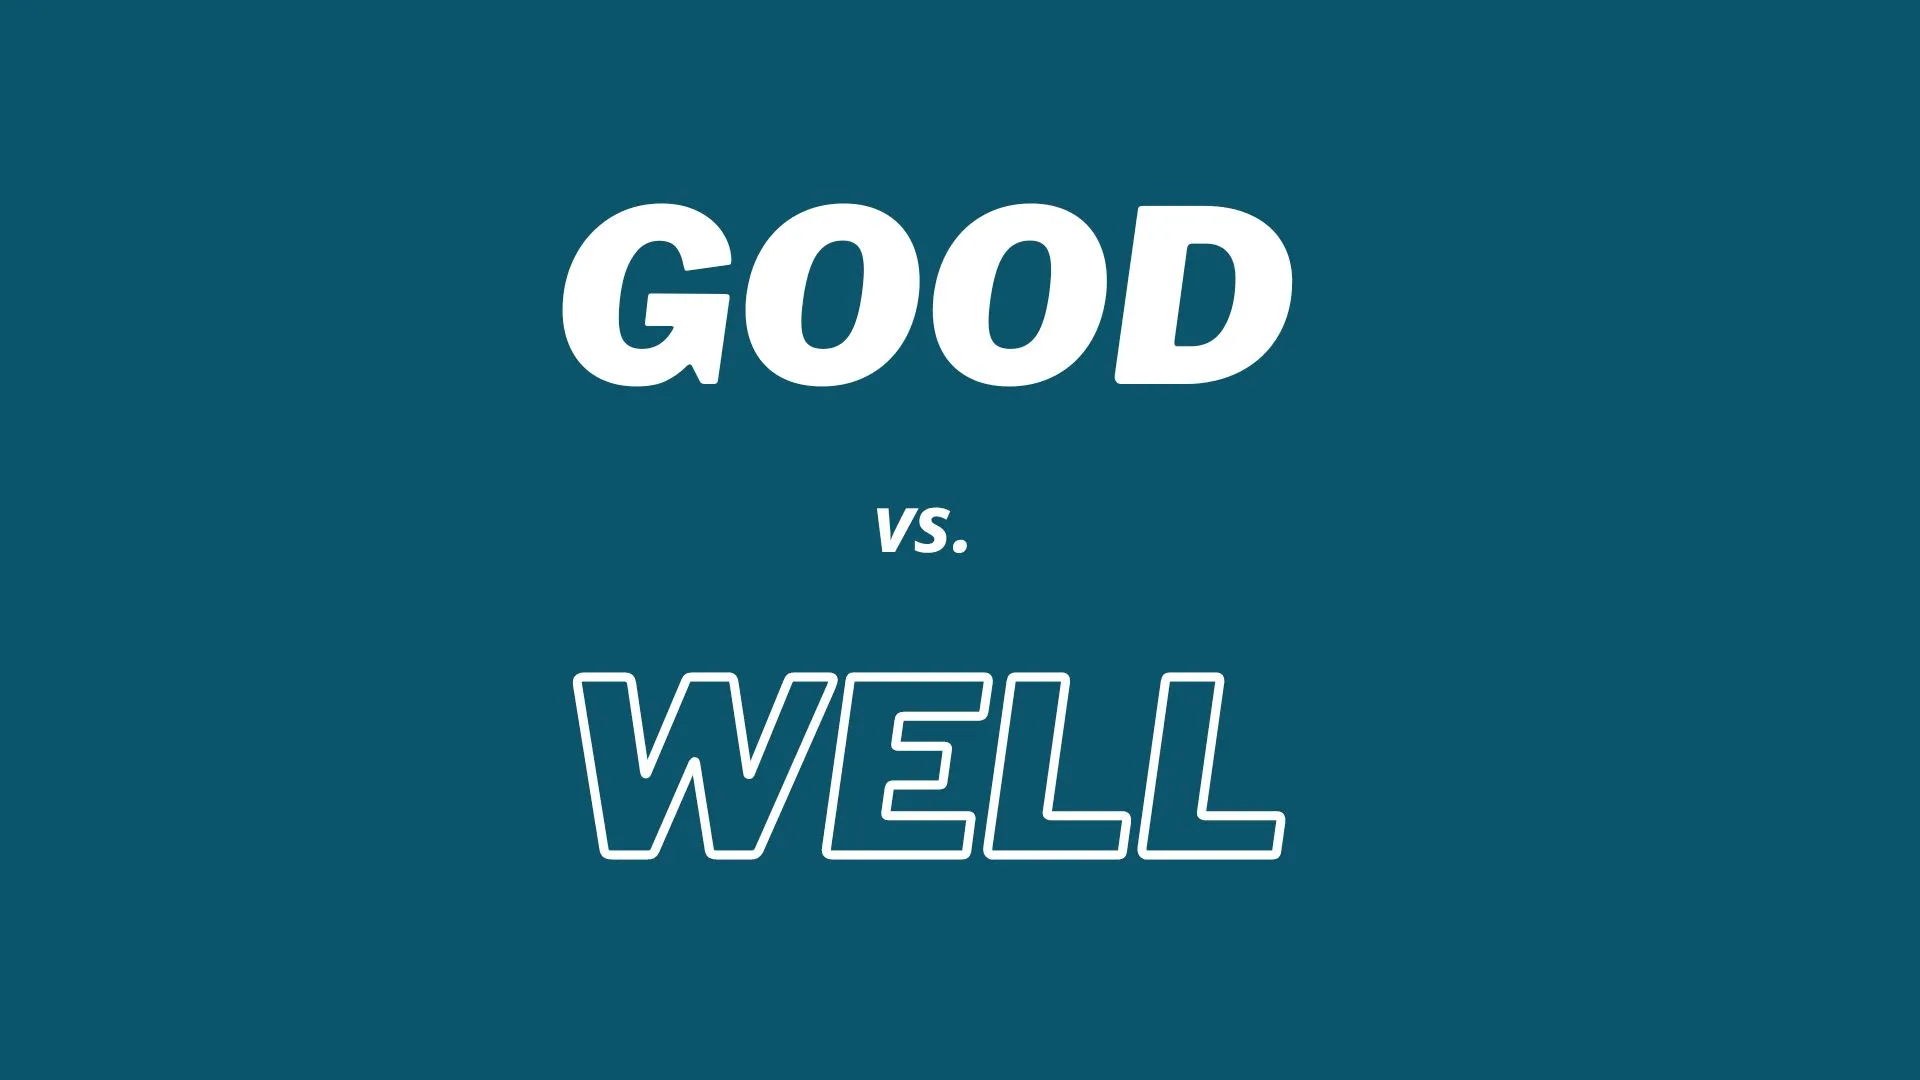 Visual comparison of the use of words "good" and "well".